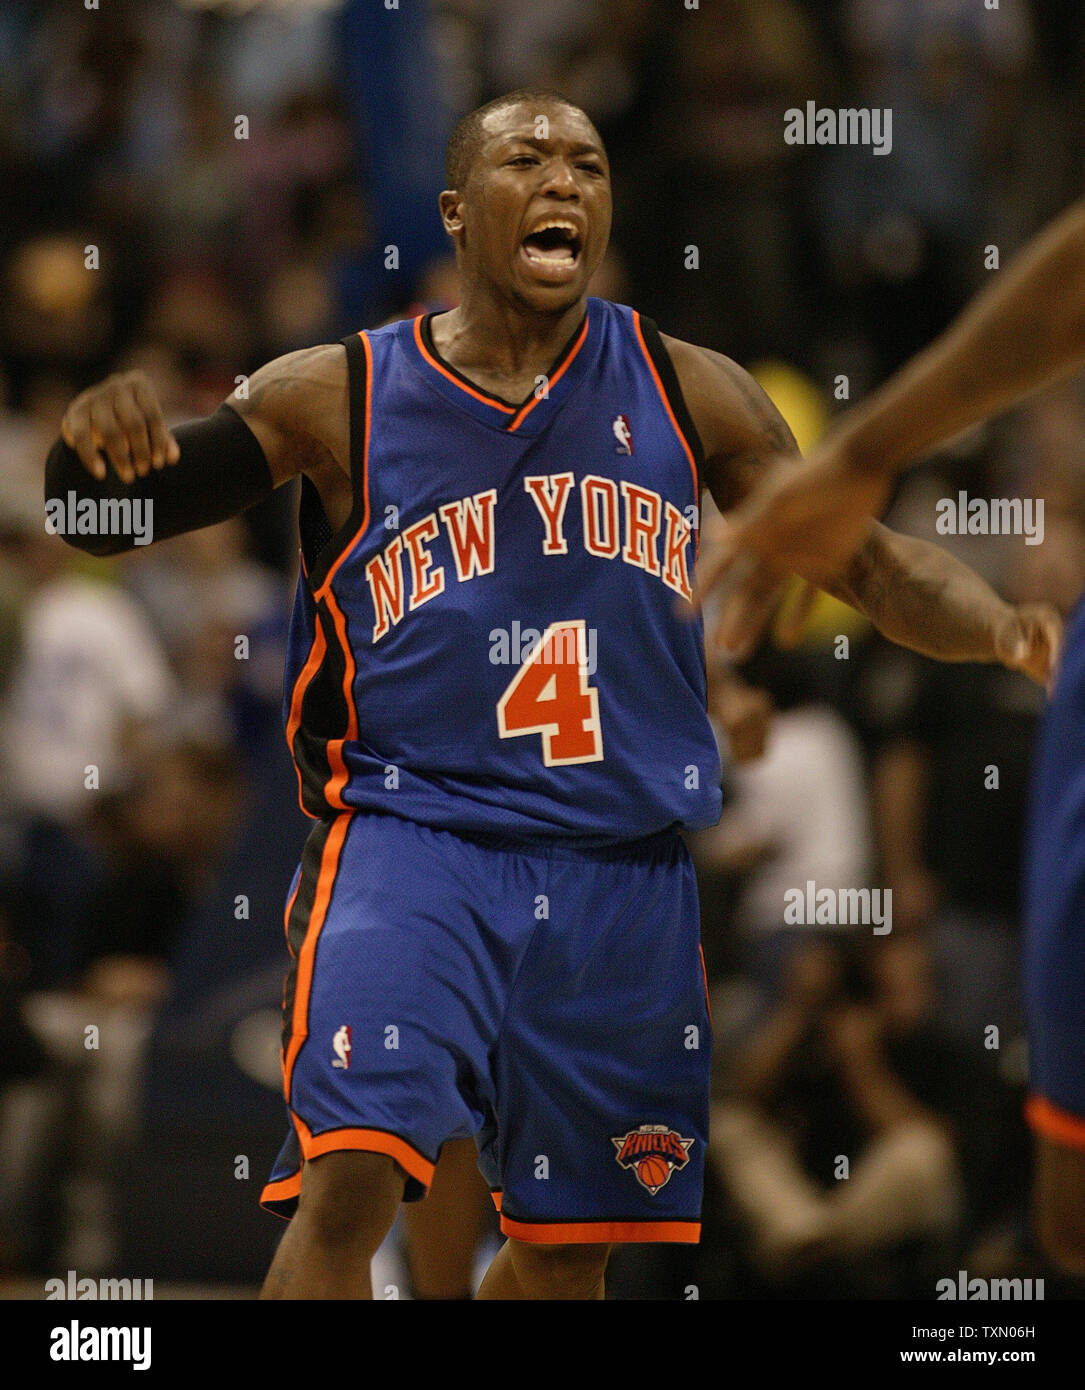 New York Knicks guard Nate Robinson celebrates teammate Jamal Crawford's  three-point shot in the closing seconds against the Denver Nuggets in the  second half at the Pepsi Center in Denver November 8,